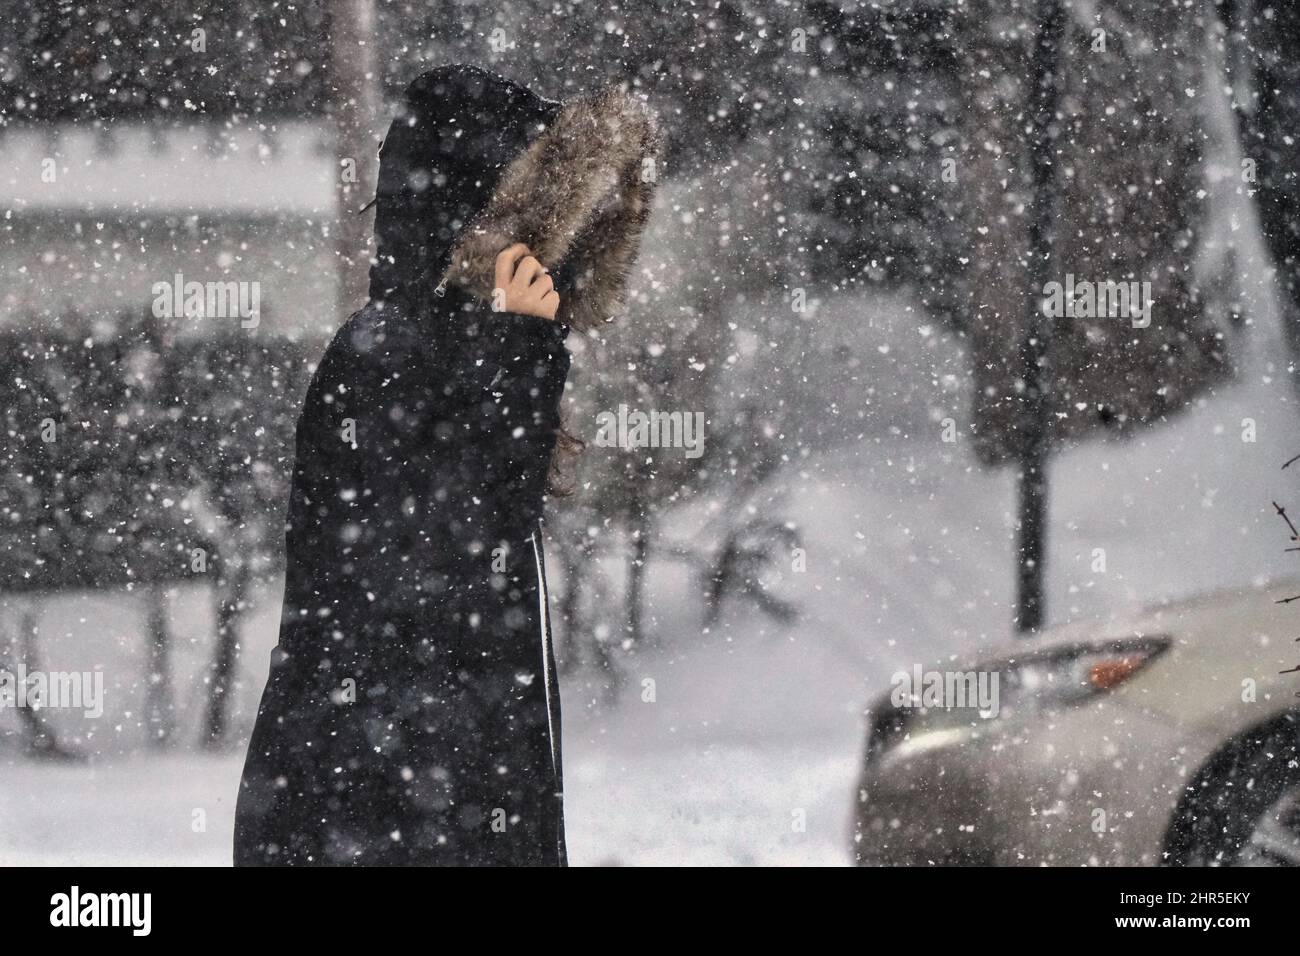 Woman walking during a winter storm. Stock Photo